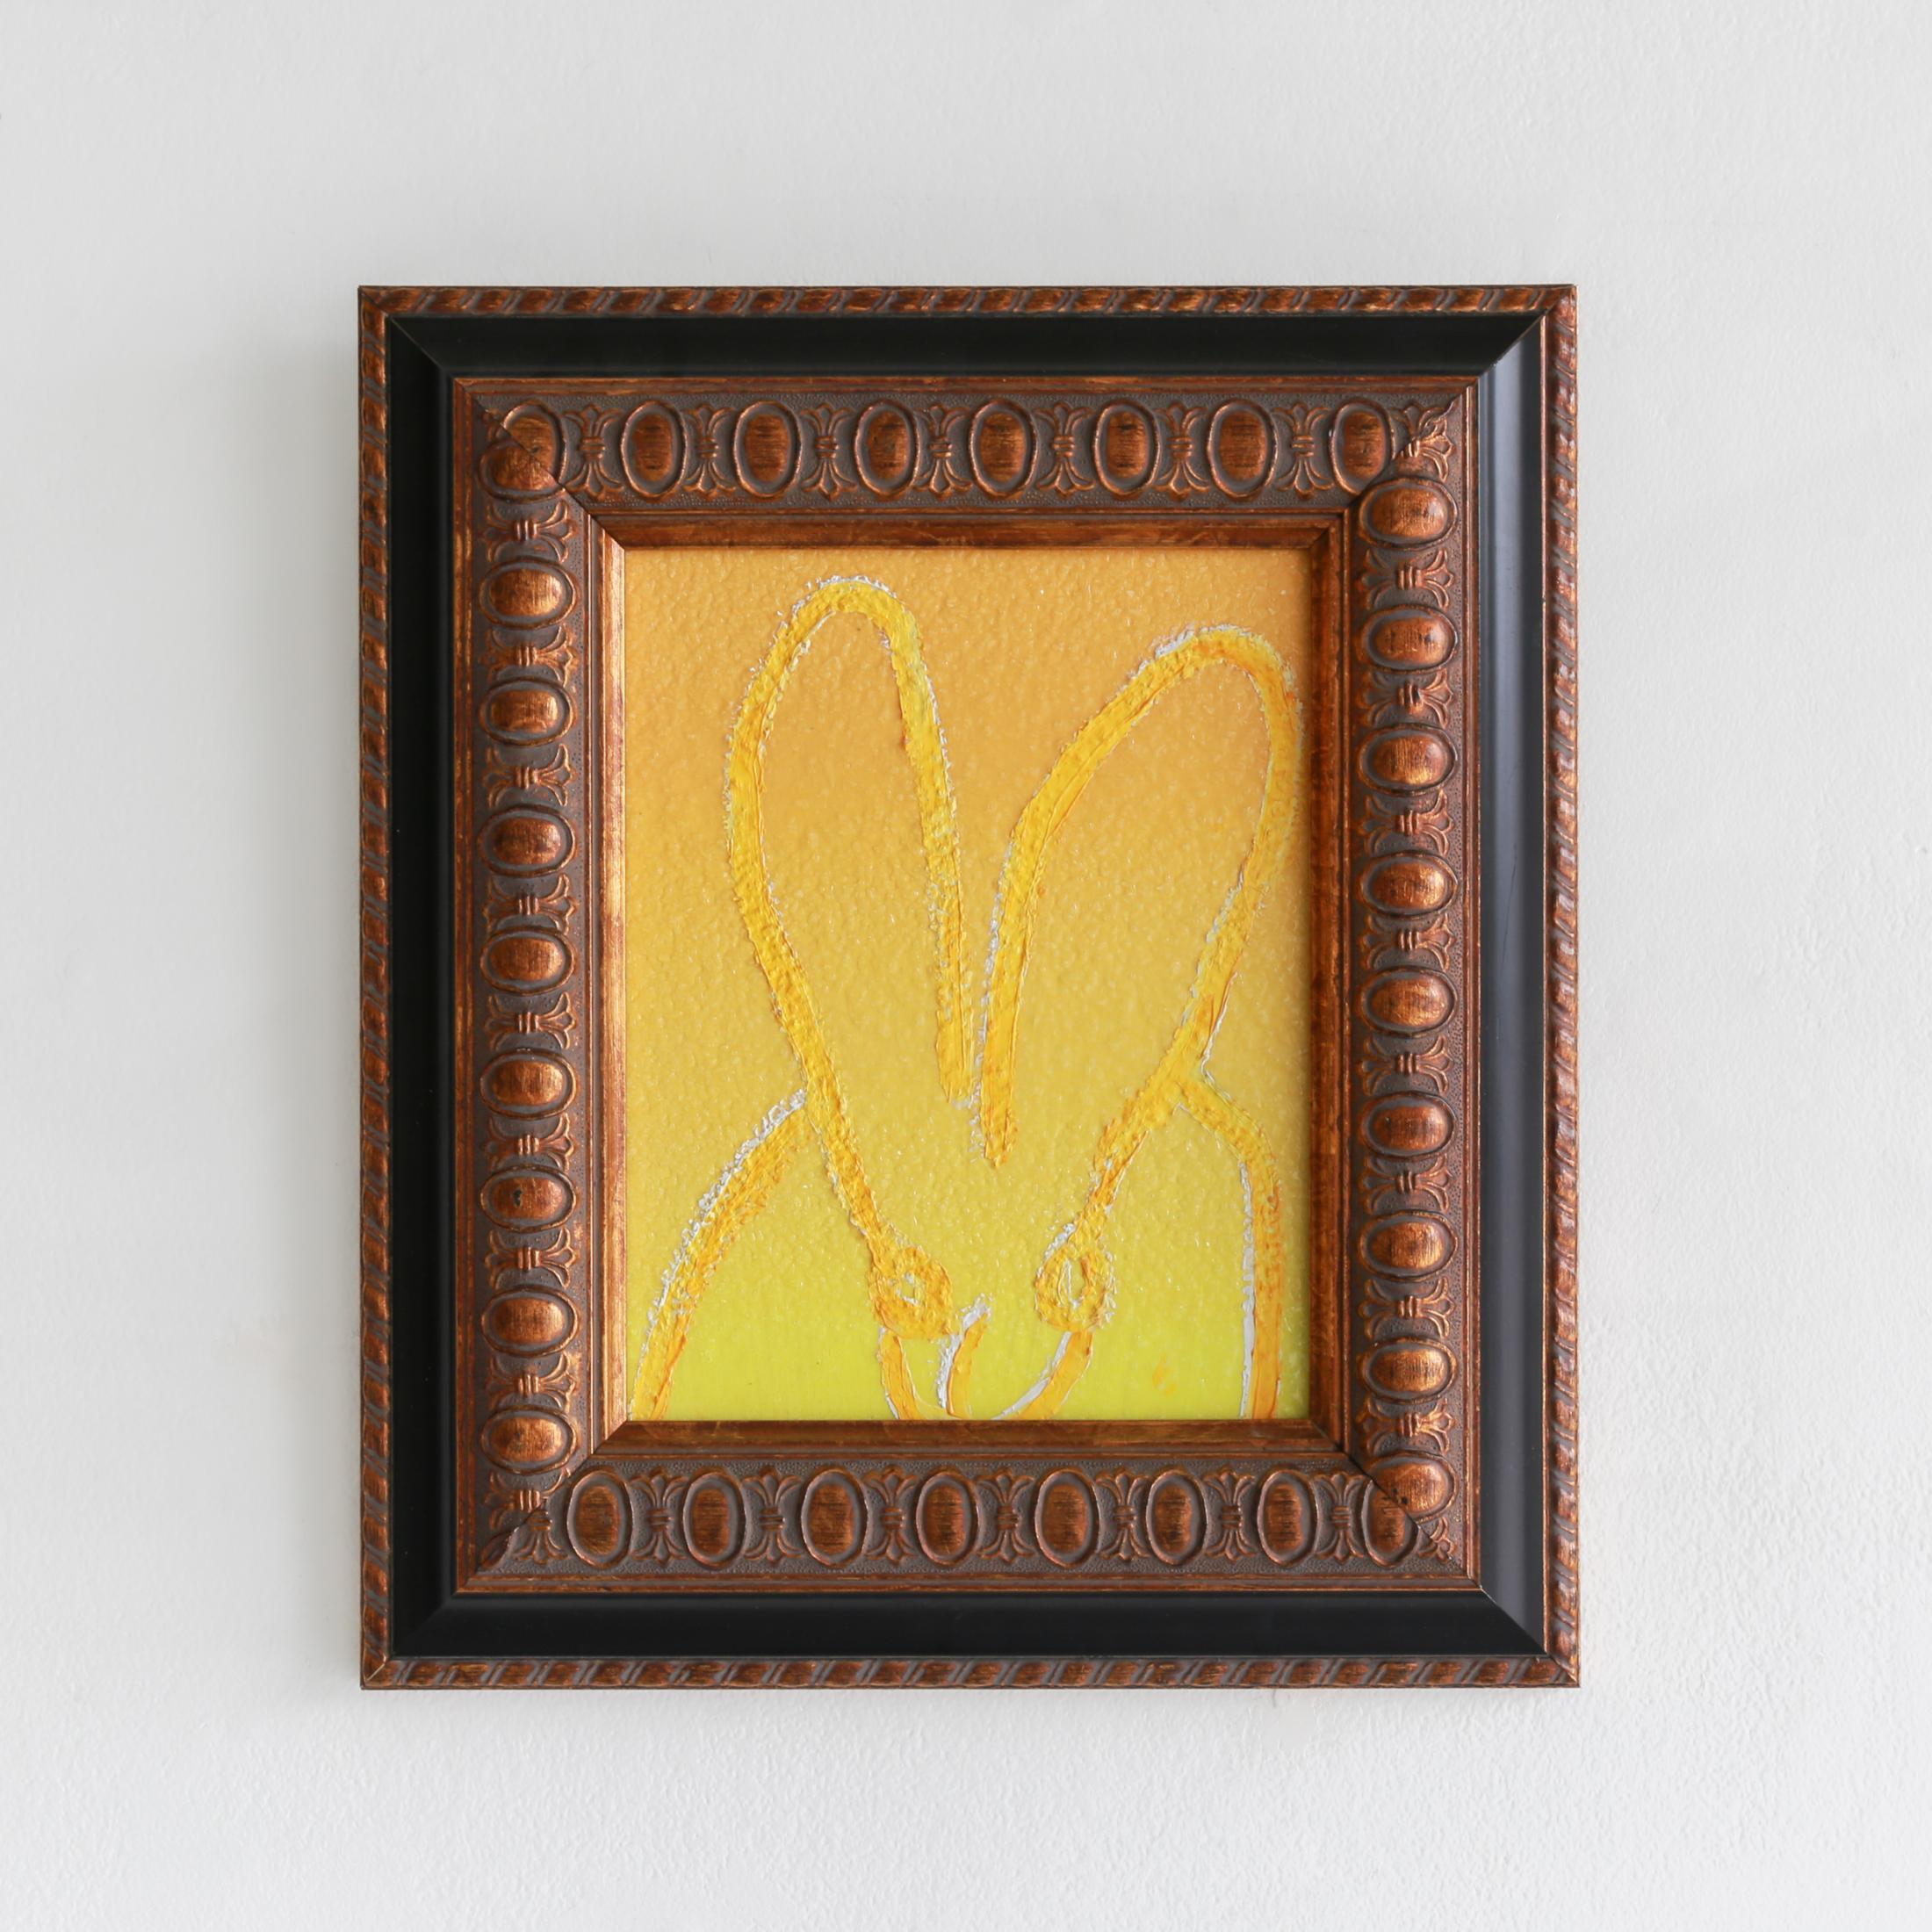 Canary Diamond - Painting by Hunt Slonem